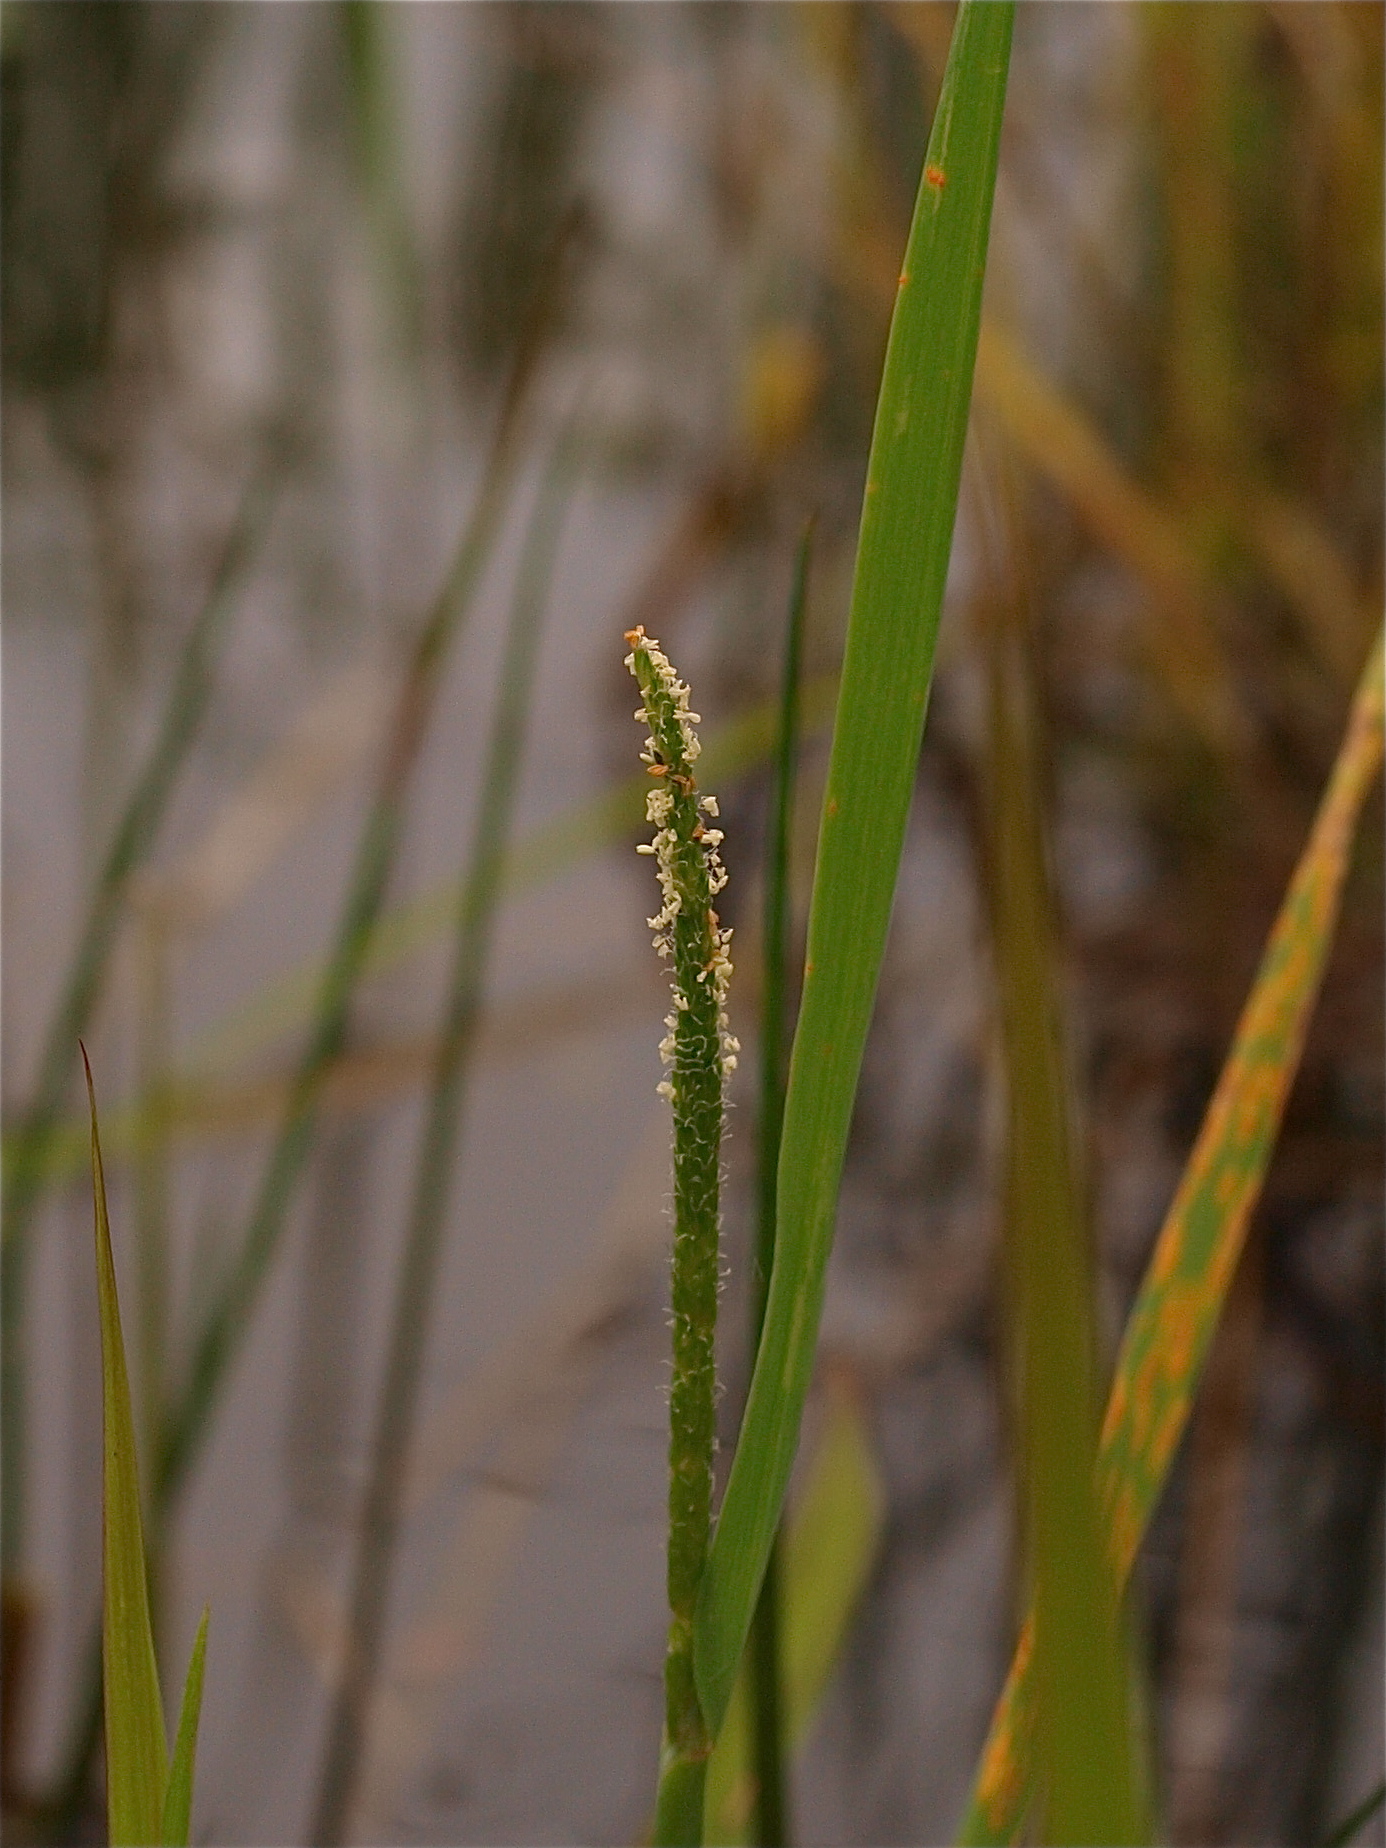 Alopecurus aequalis (Short-Awned Foxtail)